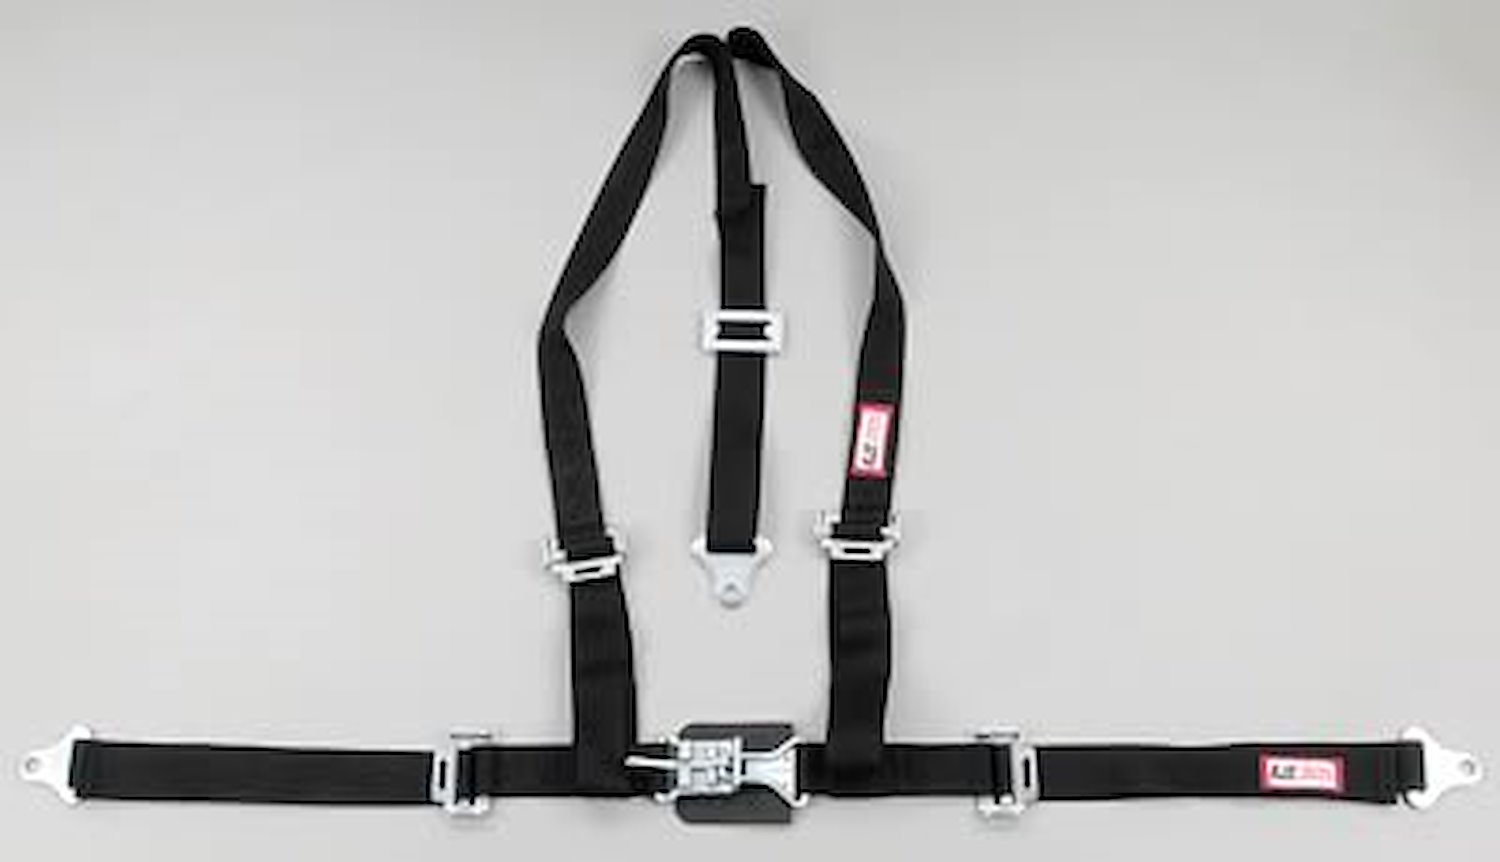 NON-SFI L&L HARNESS 2 PULL UP Lap Belt SNAP SEWN IN 2 S.H. INDIVIDUAL FLOOR Mount WRAP/BOLT HOT PINK